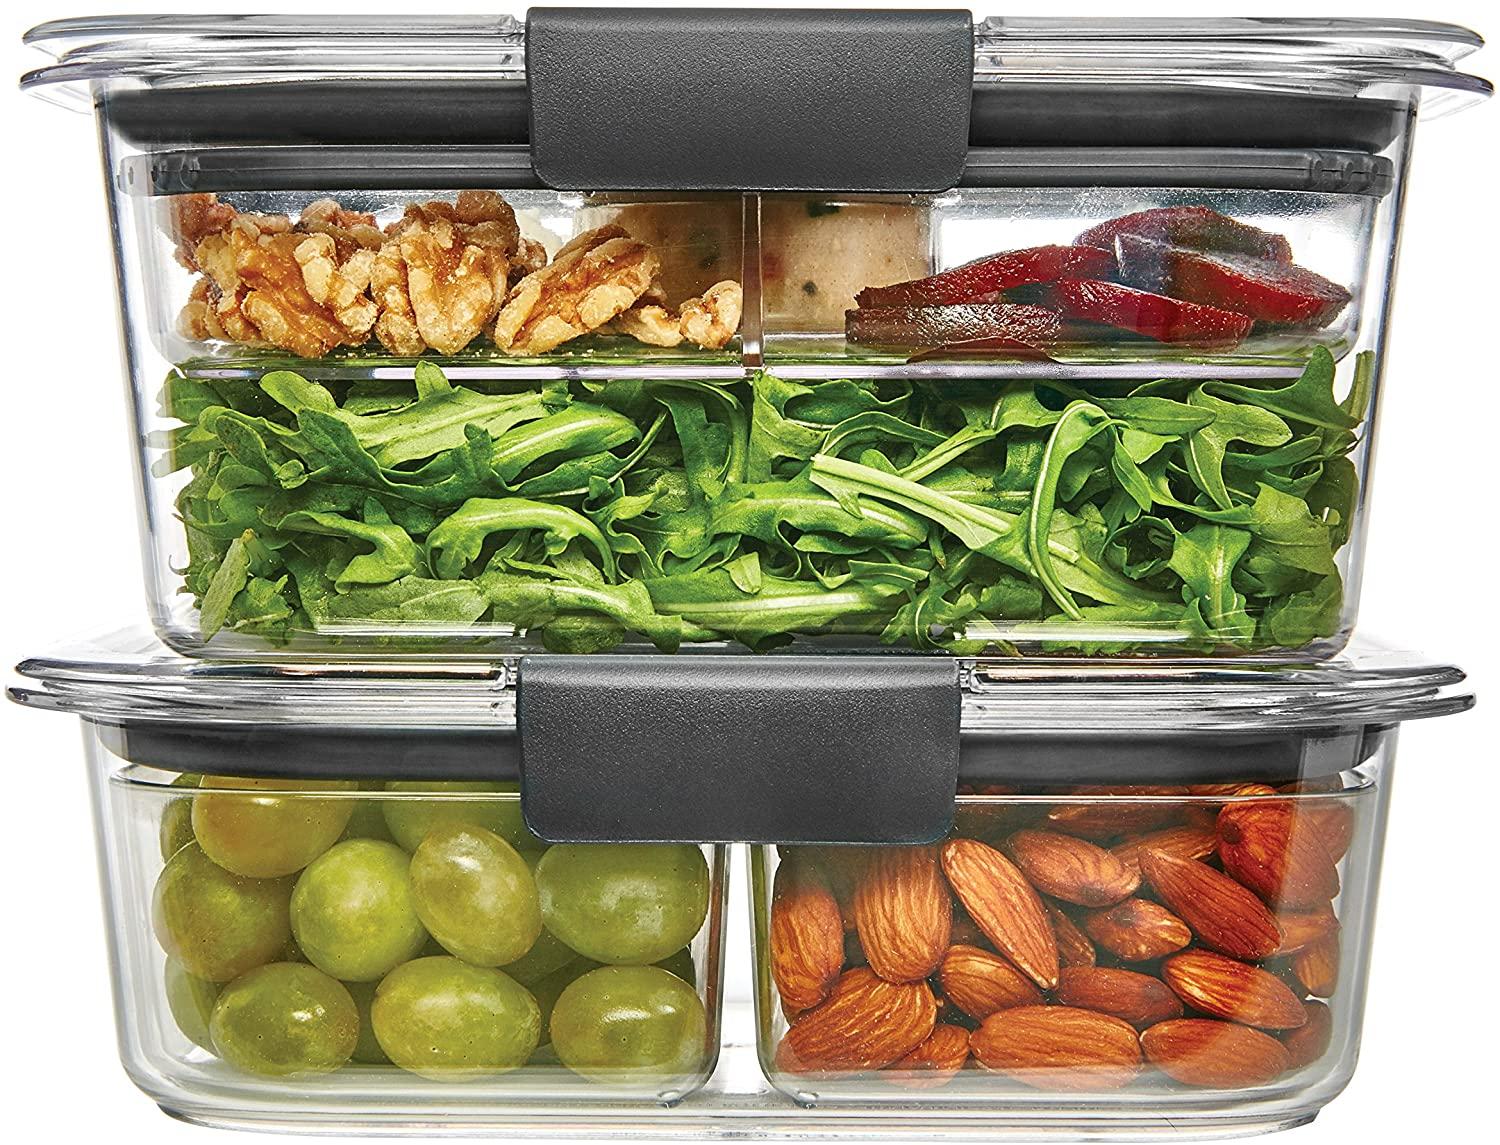 9-Piece Rubbermaid Brilliance Salad and Snack Storage Container Kit for $12.28